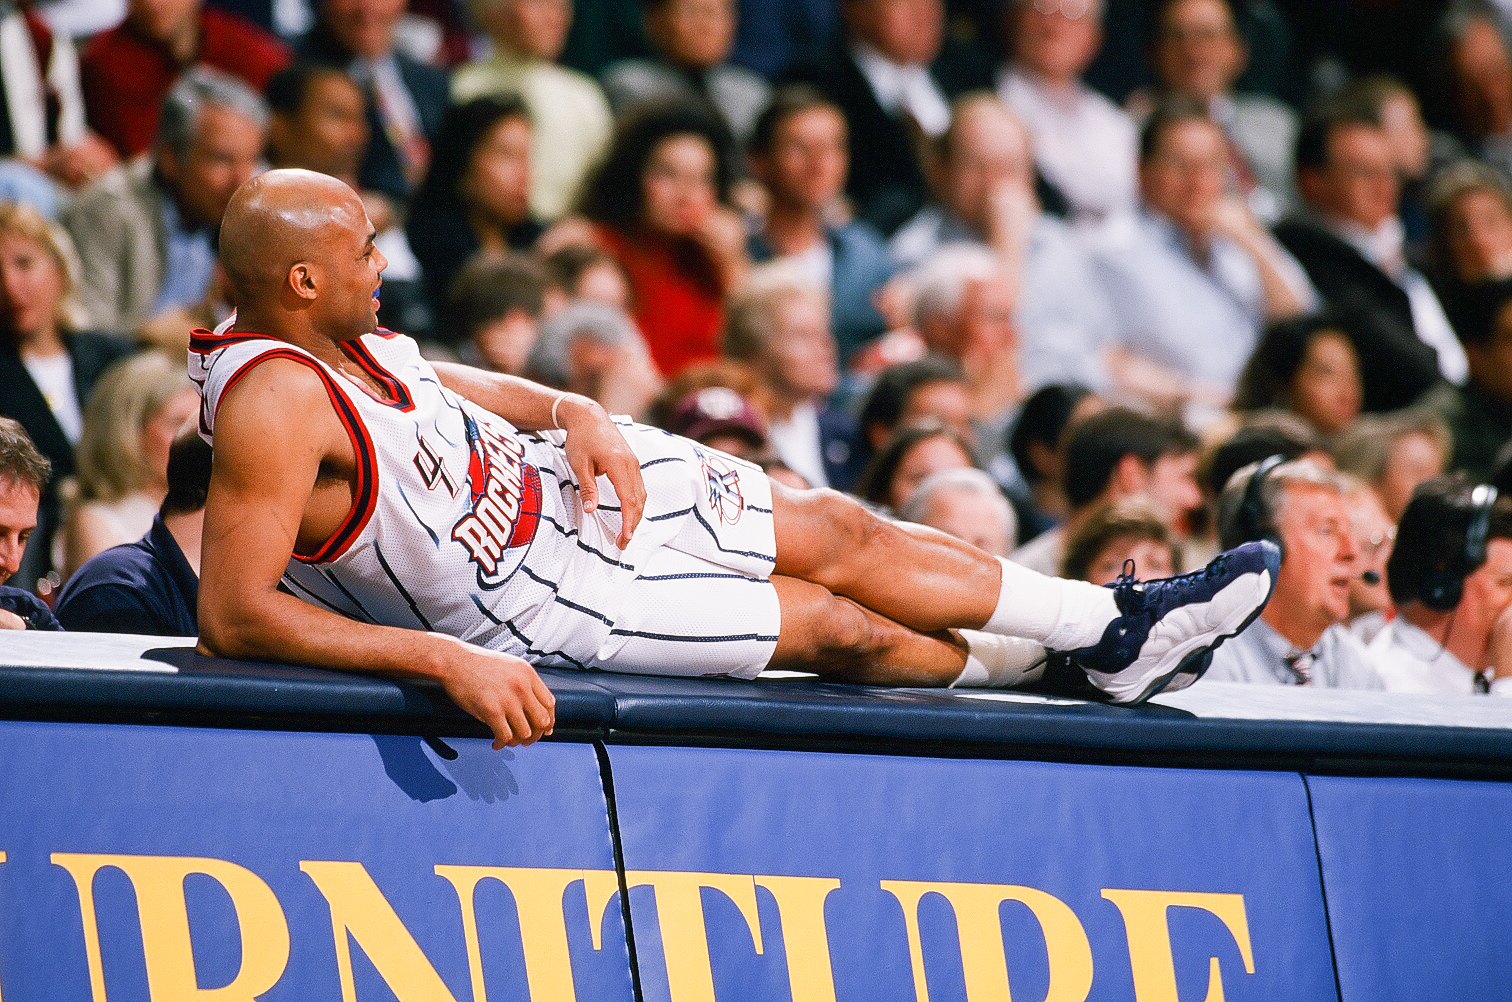 Charles Barkley of the Houston Rockets lays across the scorer's table in 1999.